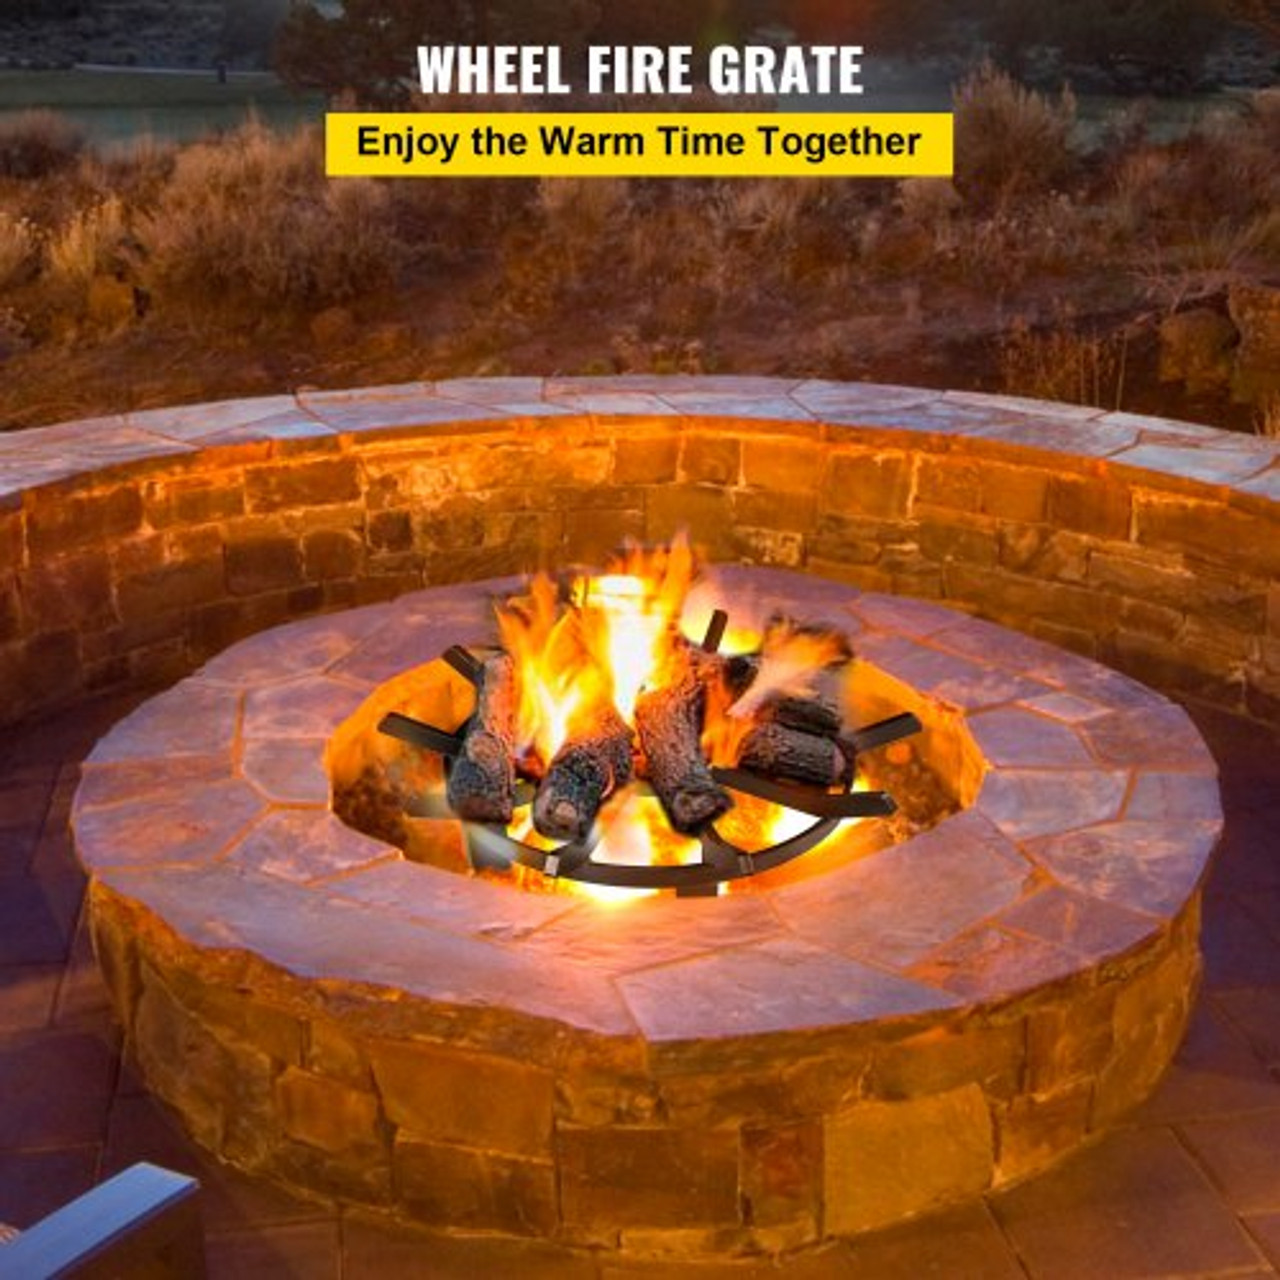 20in Fire Grate Log Grate ,Wagon Wheel Firewood Grates 12 Iron Bars, Fireplace Grates Burning Rack Holder 4 Legs for Indoor Chimney, Hearth Wood Stove and Outdoor Camping Fire Pit